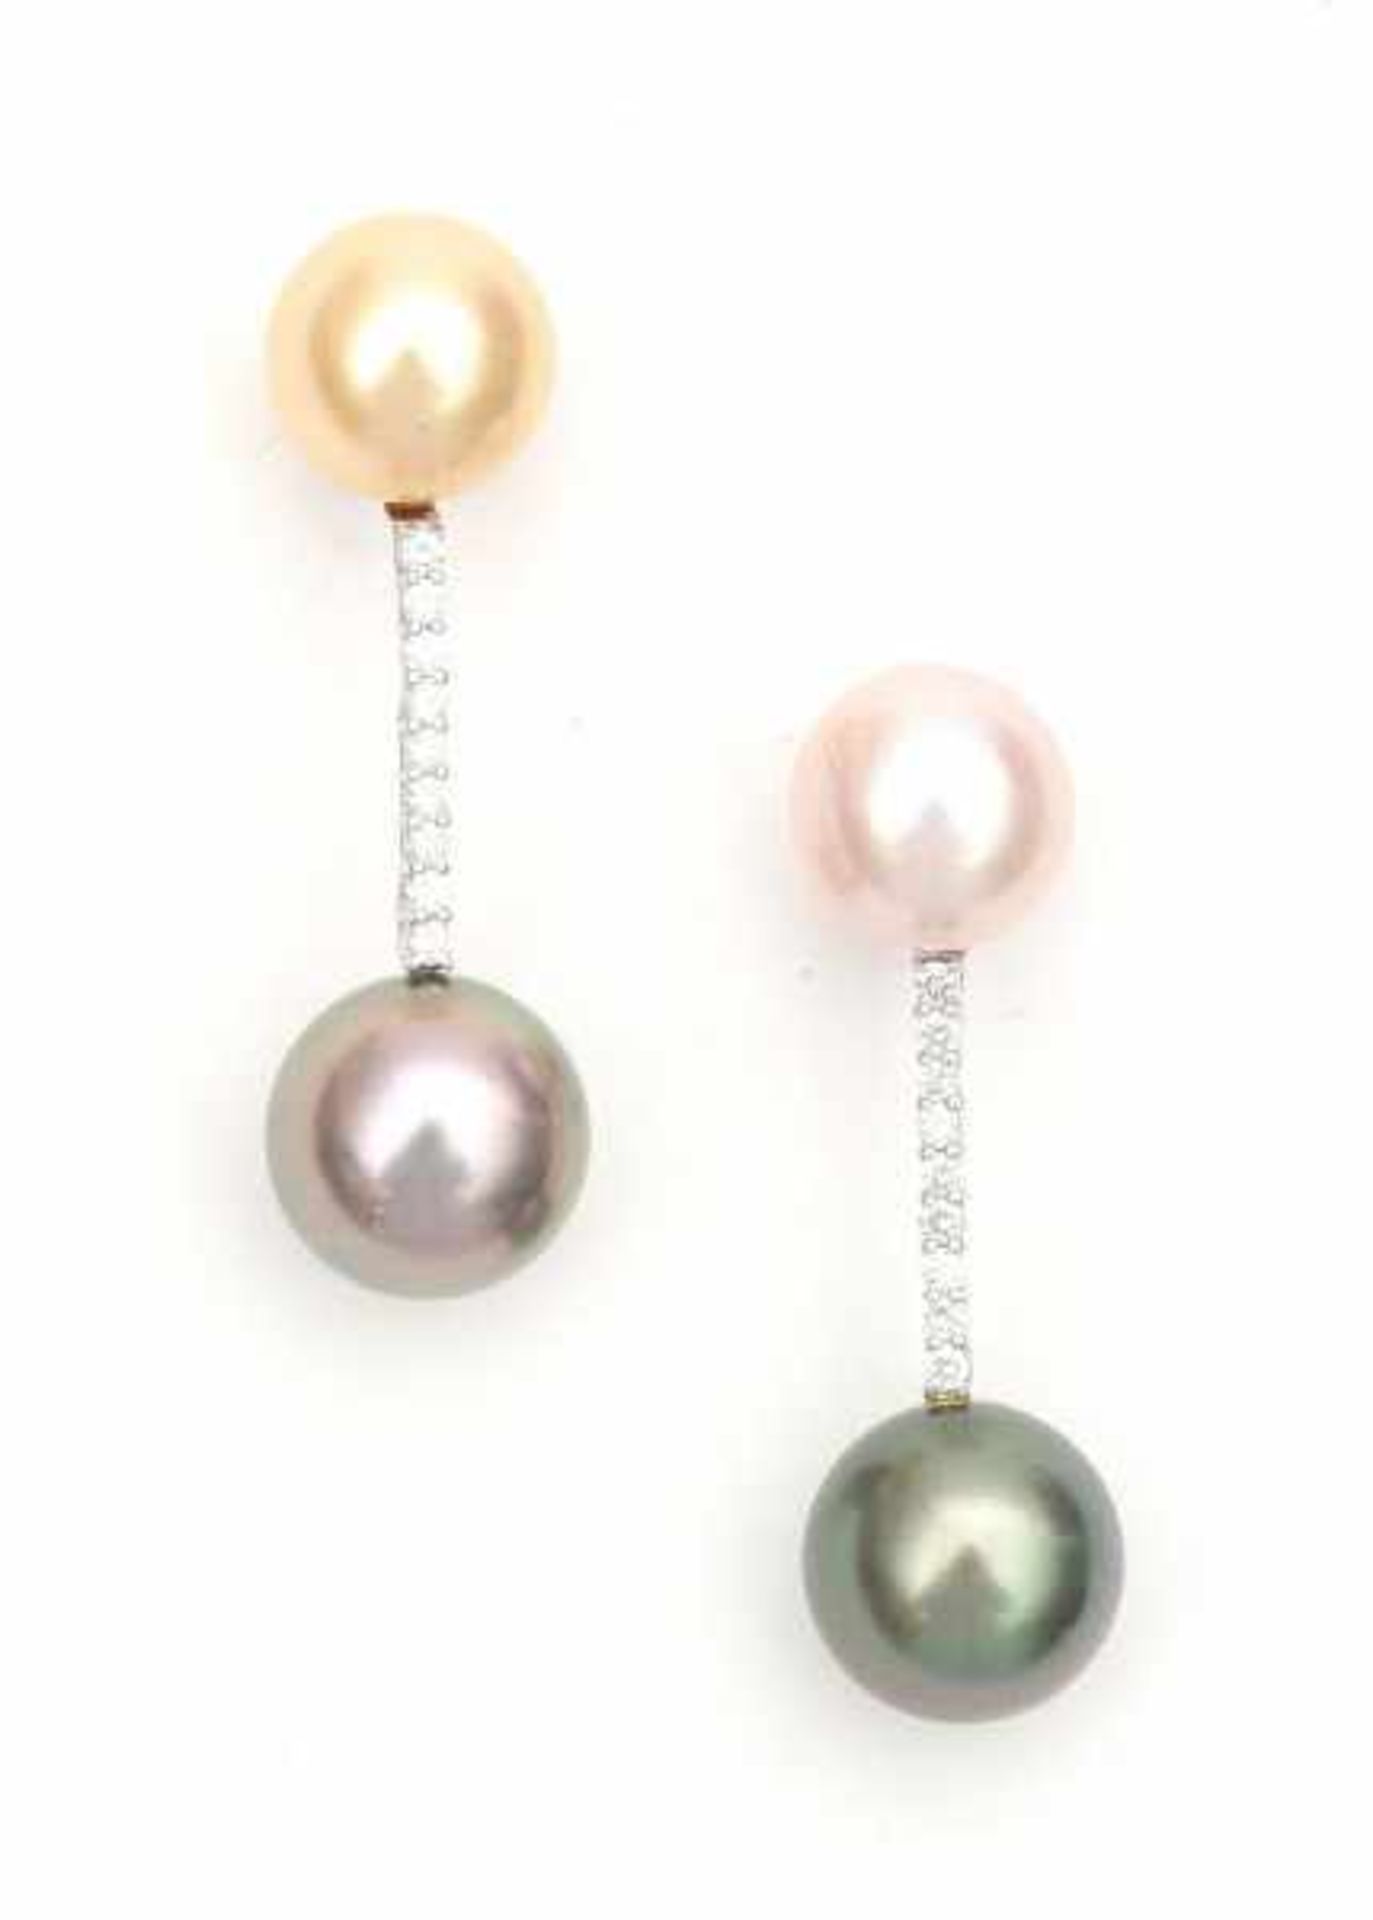 A pair of 18 carat white gold pearl earrings. Set with four different coloured, cultured pearls with